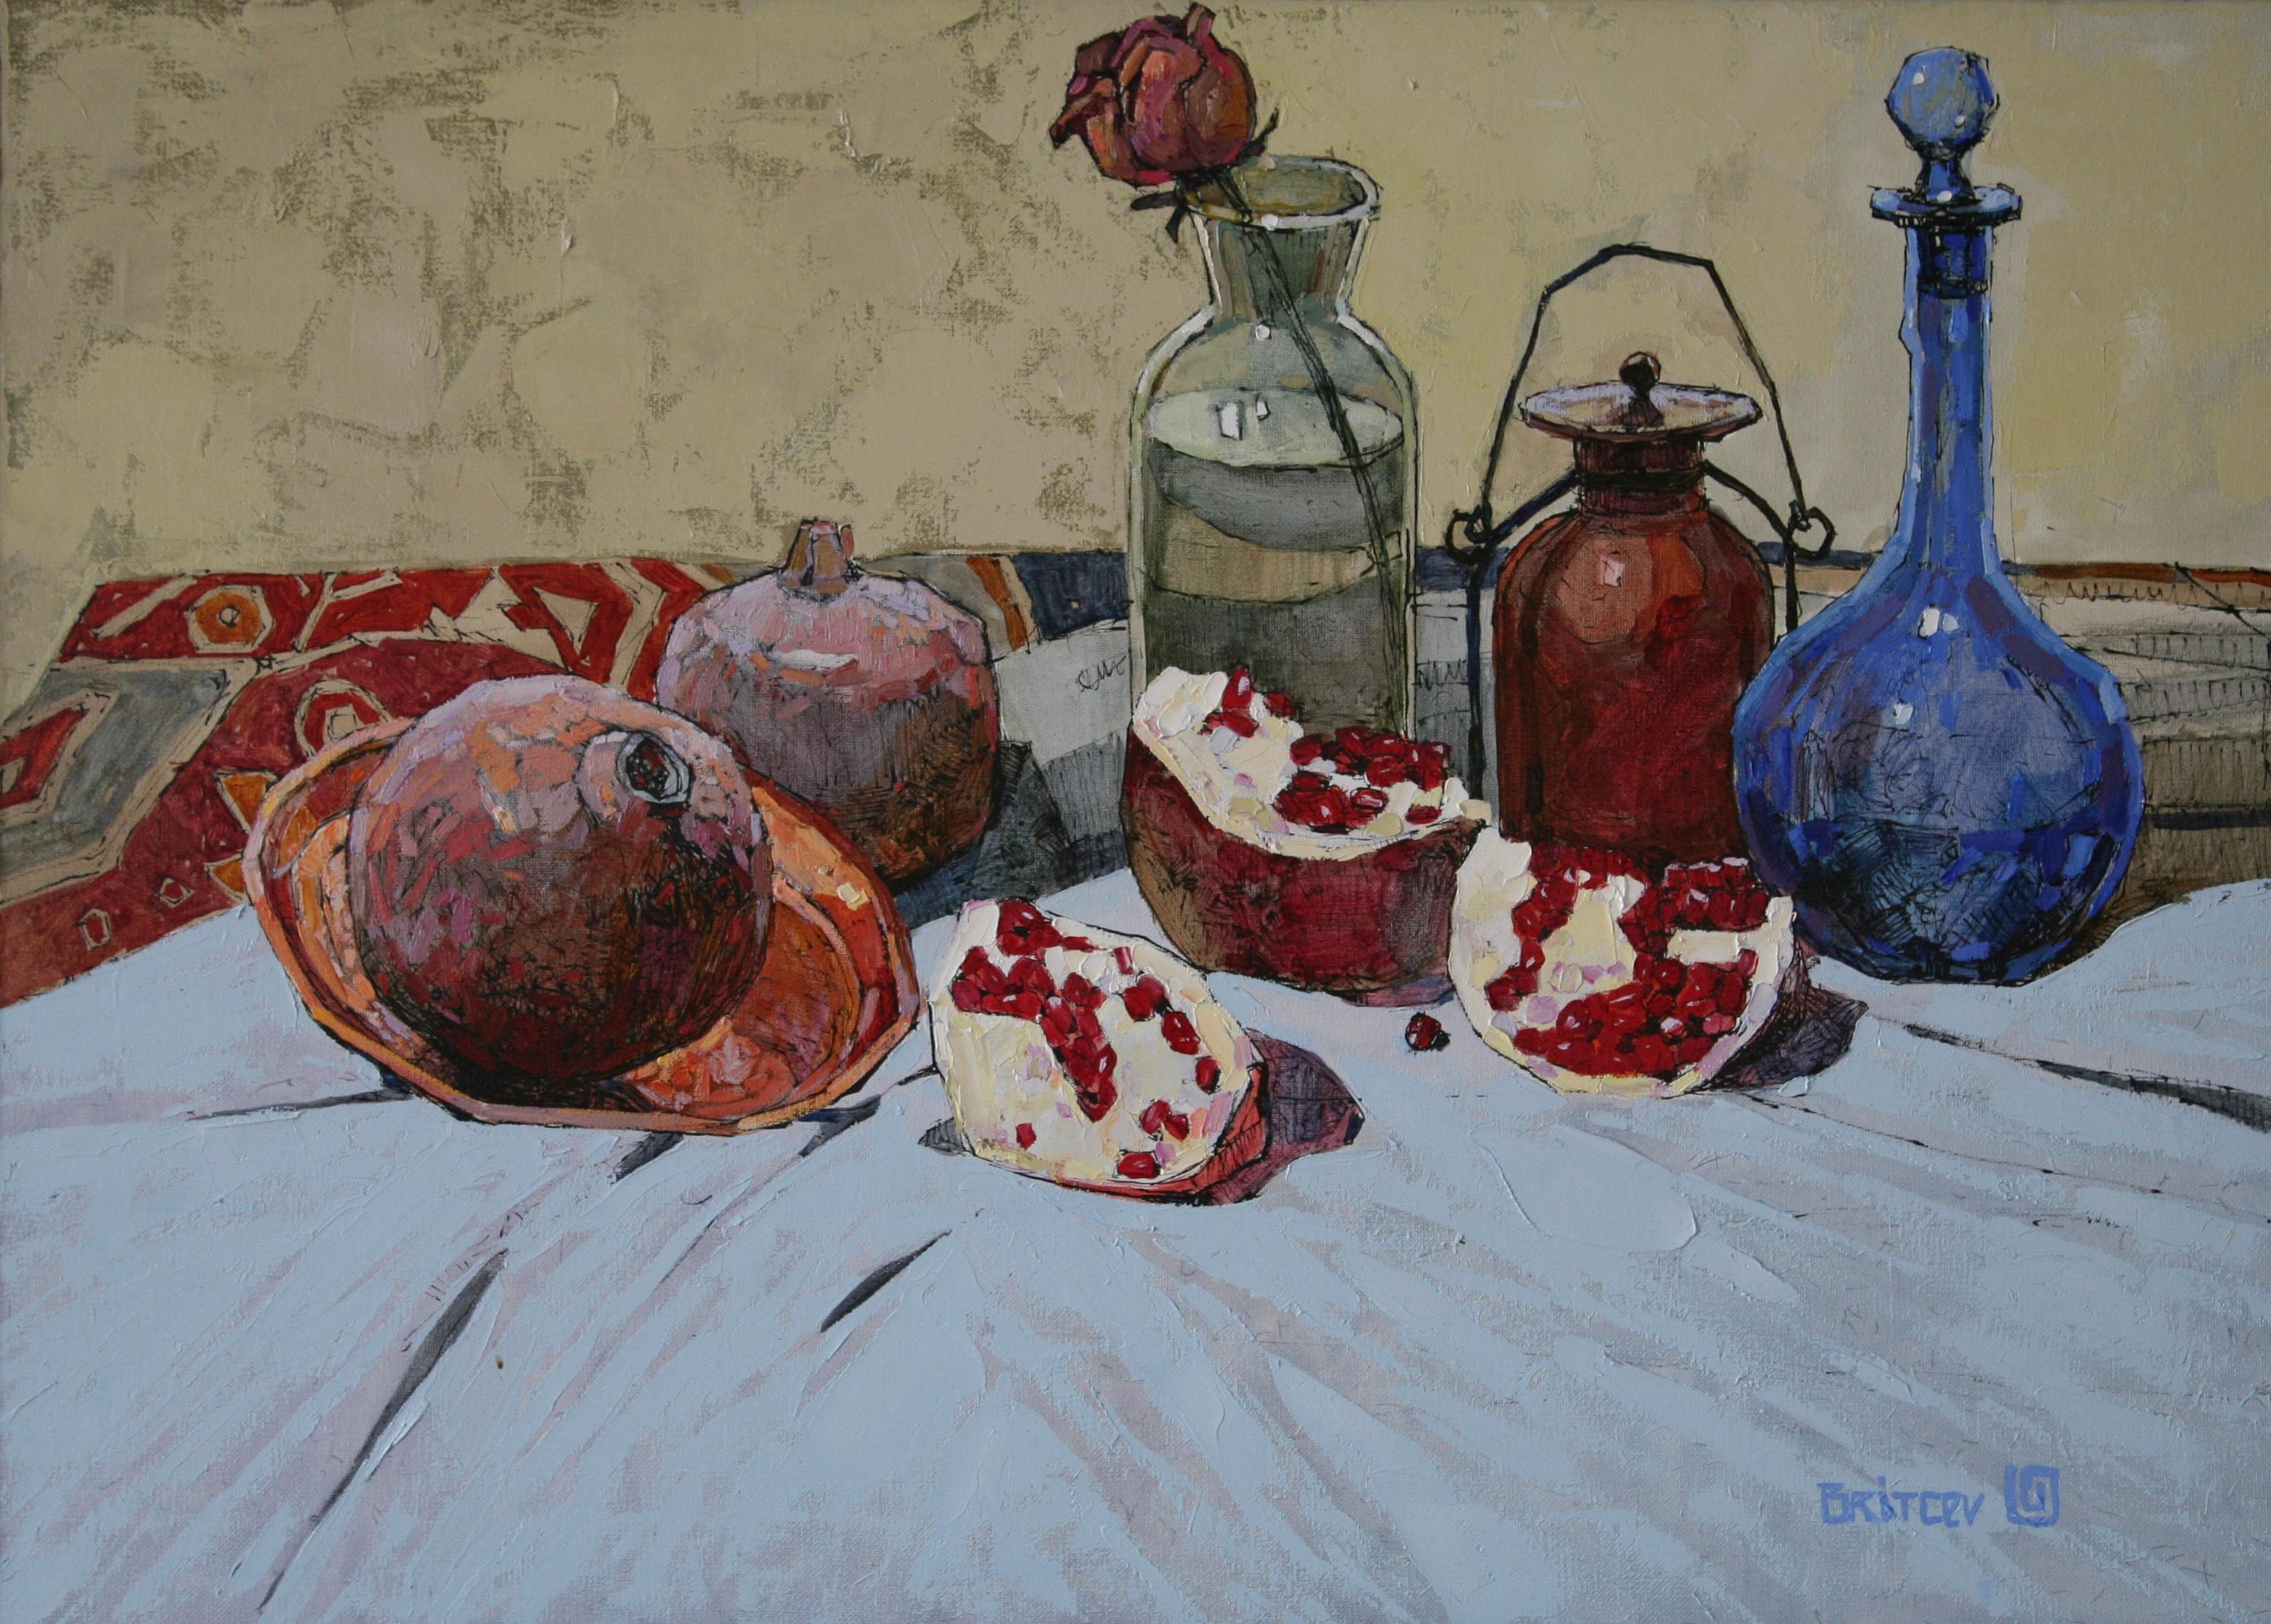 Pomegranate slices - Painting Colors White Red Blue Pink Pastel Brown Purple